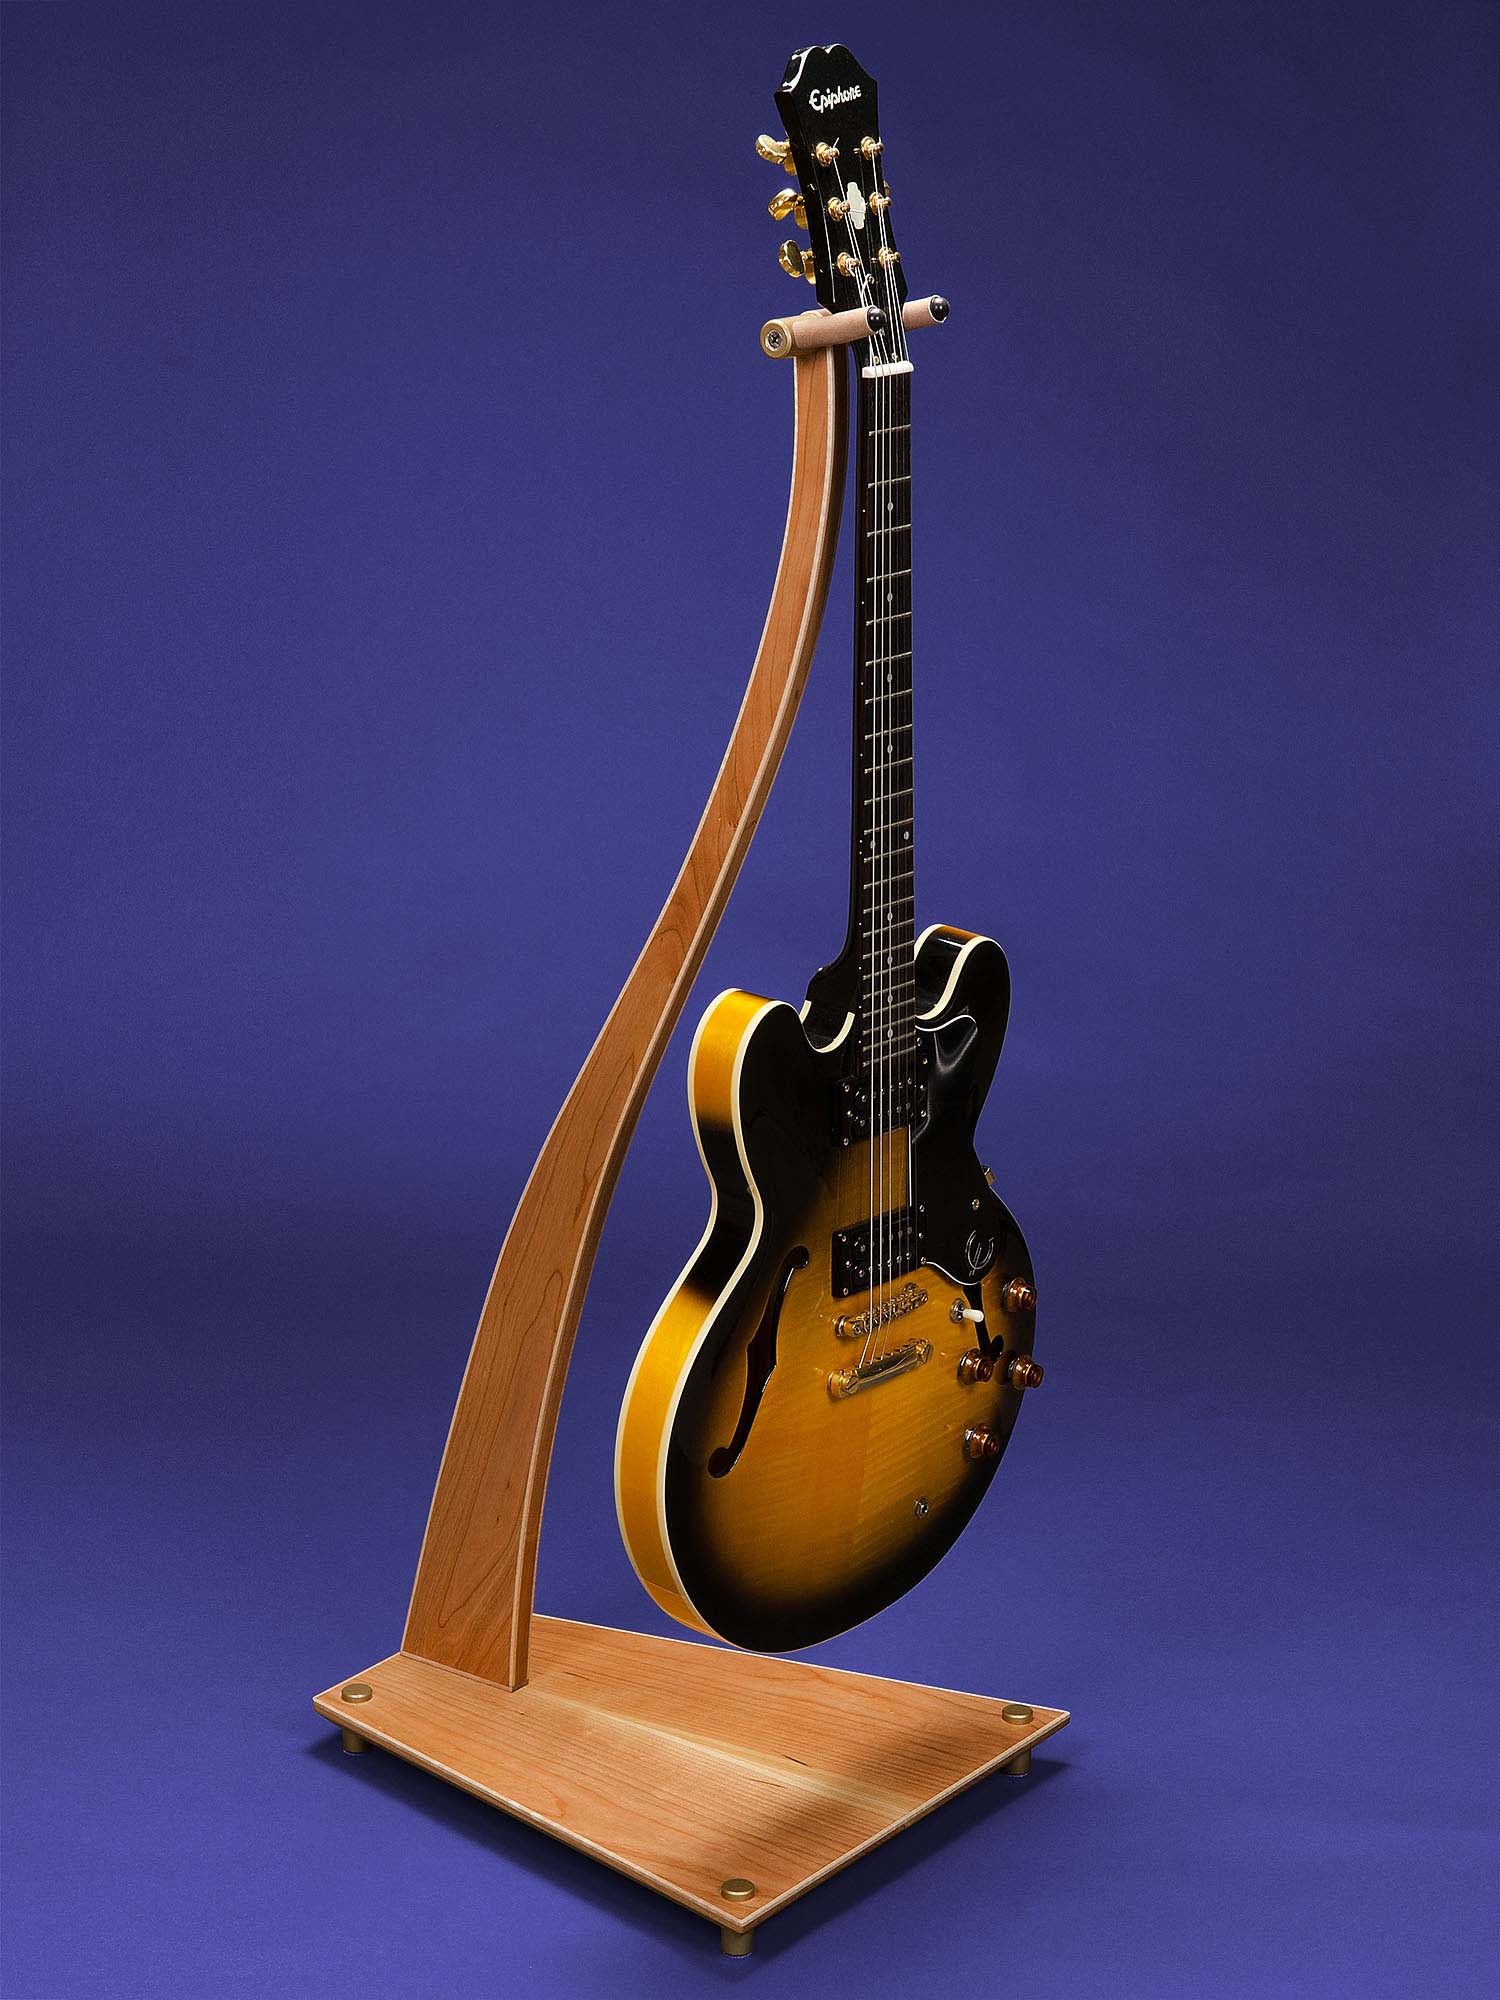 SM Guitar Stand in Cherry with Curly Maple Binding.